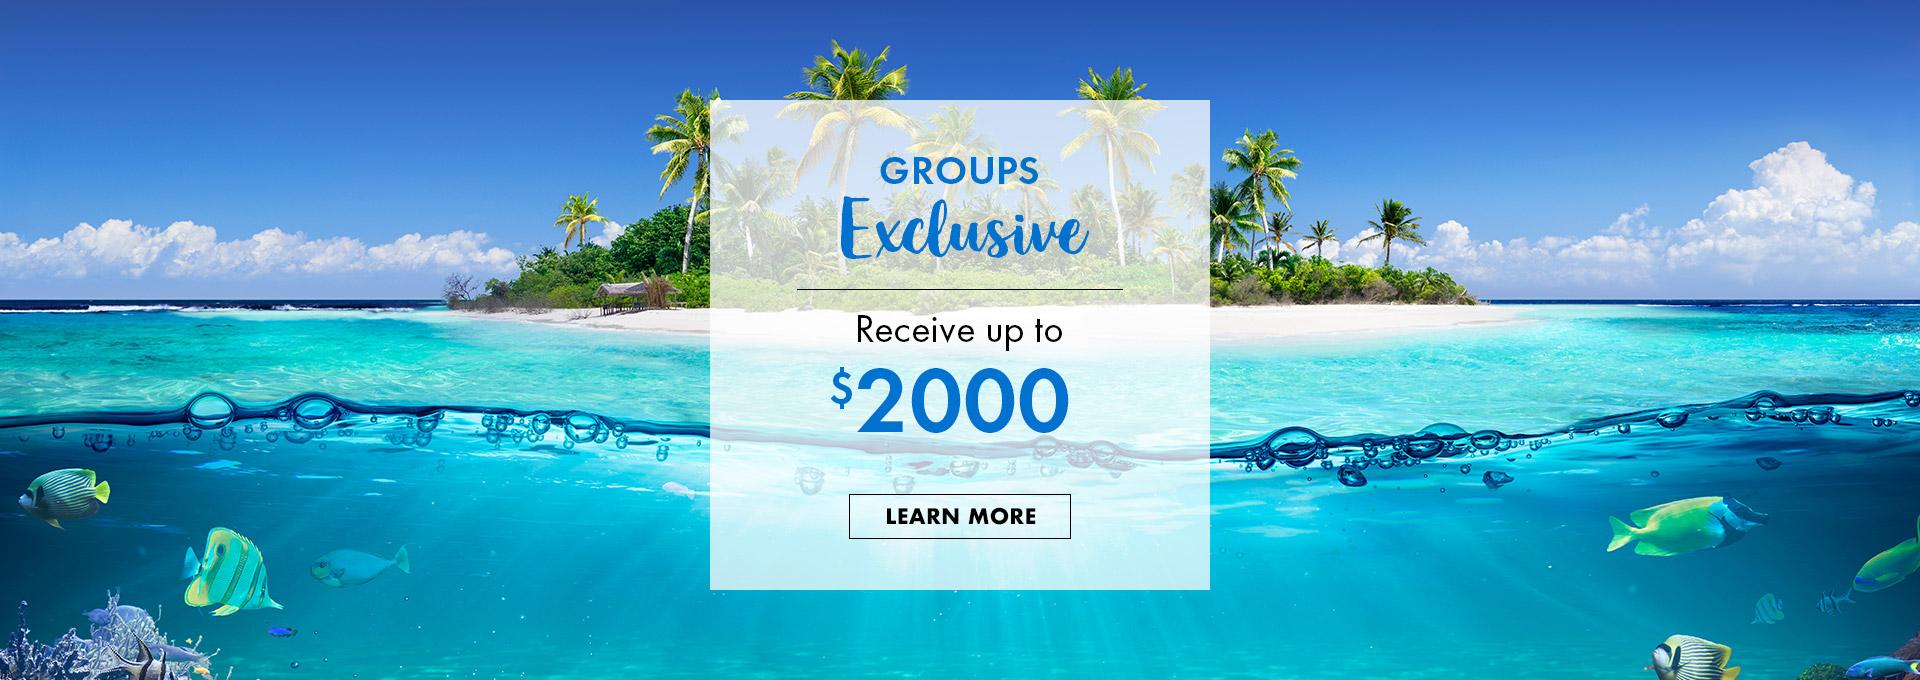 Groups Exclusive: Receive up to $2000 Offer